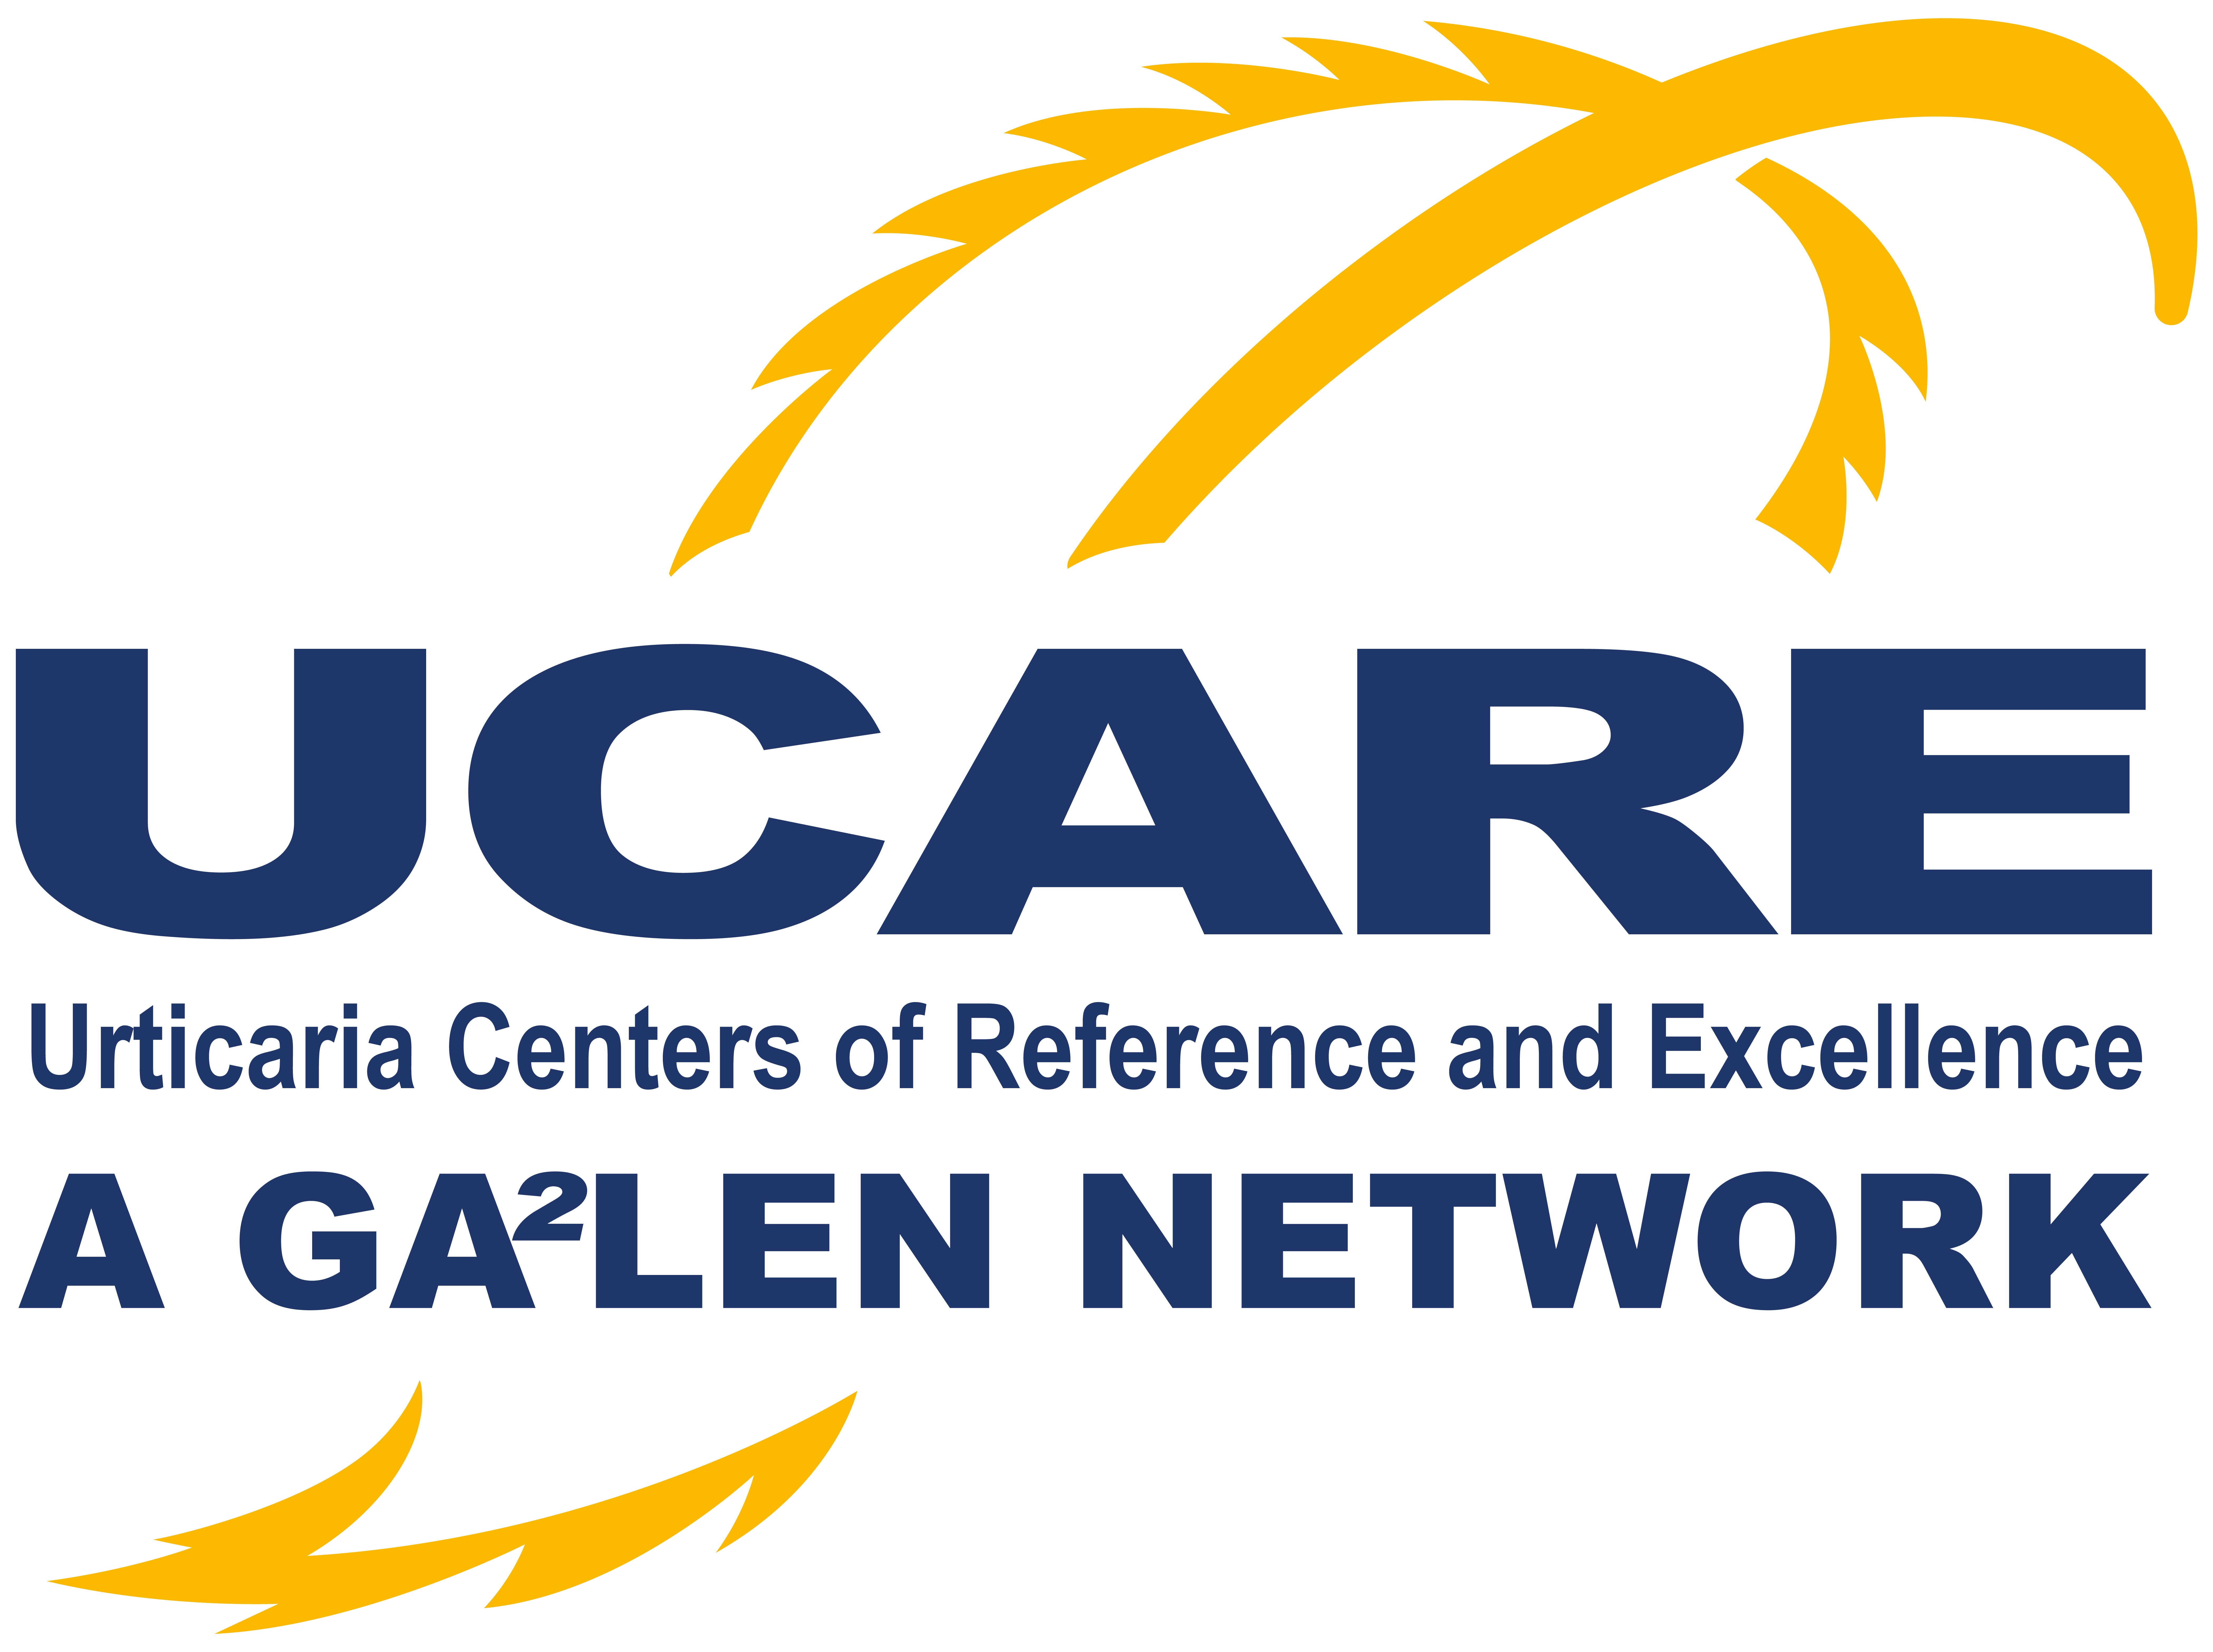 Urticaria Centers of Reference and Excellence (UCARE)